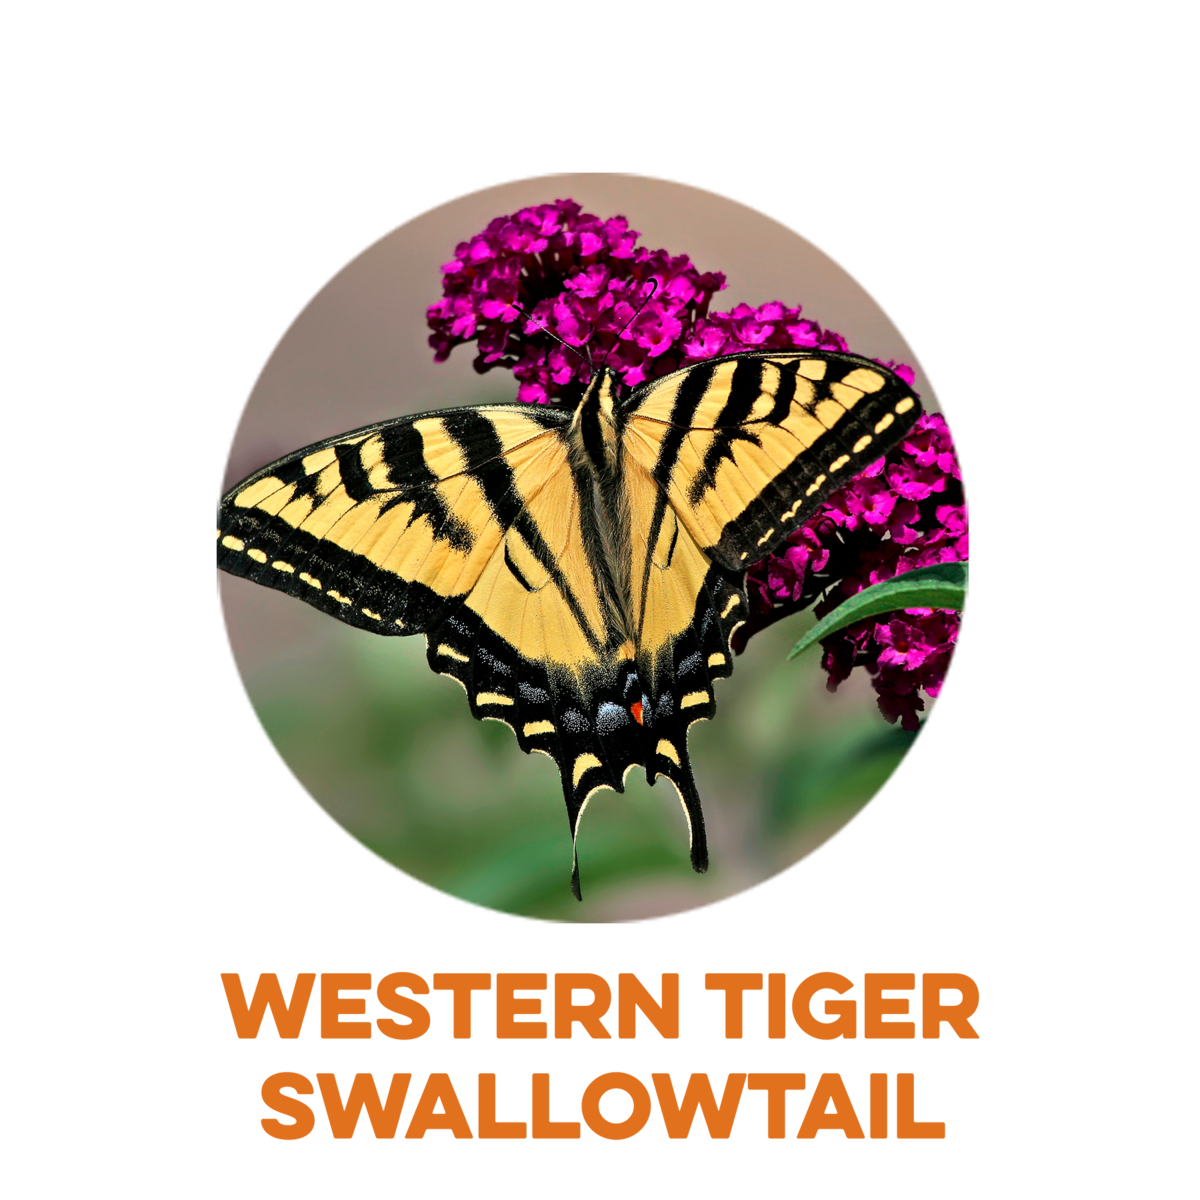 Wester Tiger Swallowtail Butterfly 